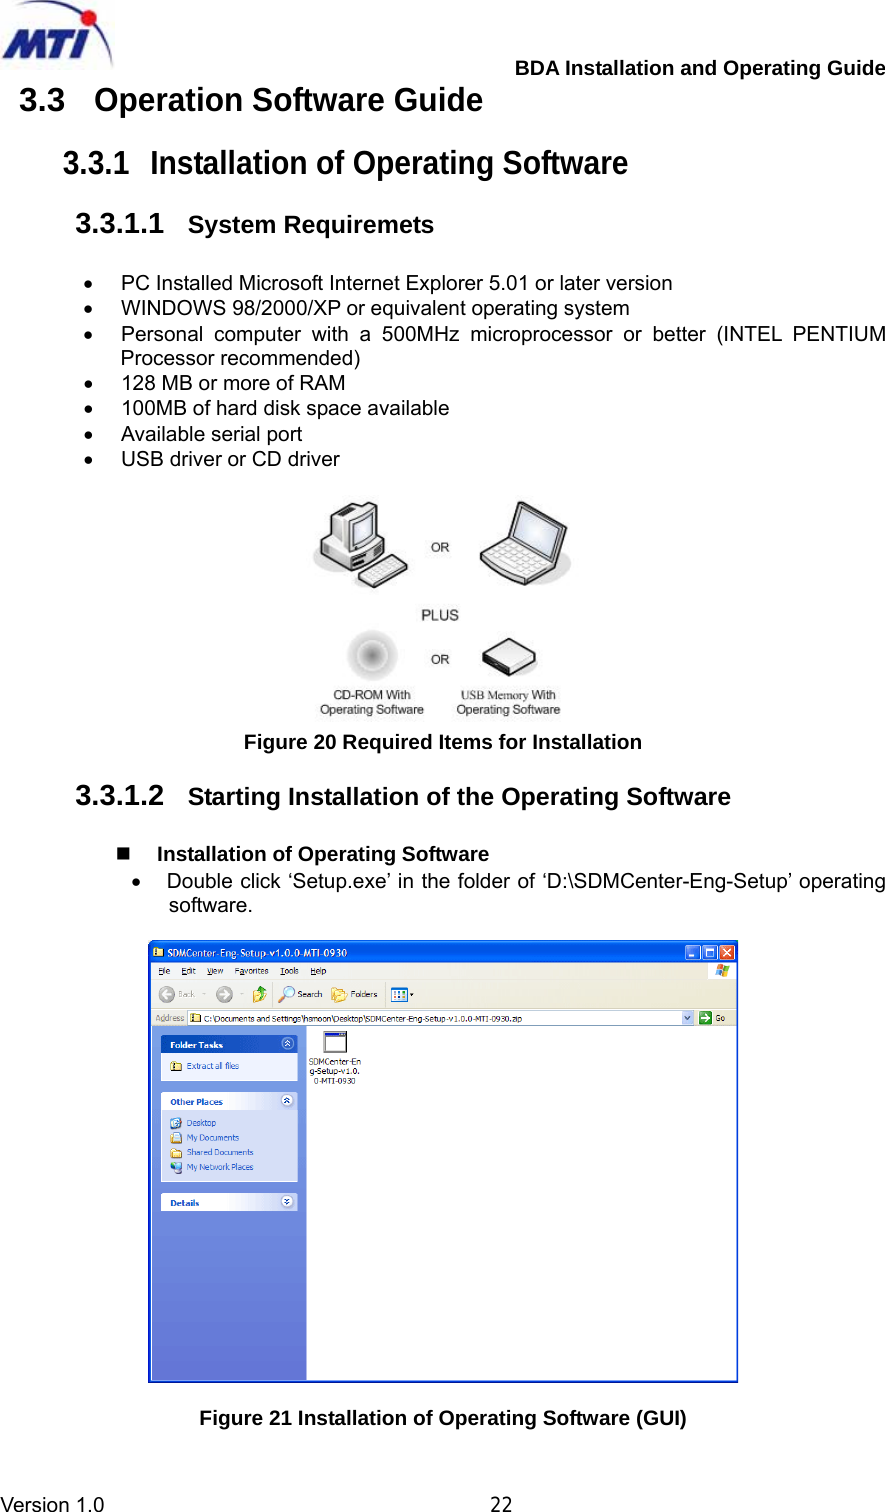         BDA Installation and Operating Guide Version 1.0                                       22 3.3 Operation Software Guide  3.3.1  Installation of Operating Software  3.3.1.1  System Requiremets  •  PC Installed Microsoft Internet Explorer 5.01 or later version •  WINDOWS 98/2000/XP or equivalent operating system •  Personal computer with a 500MHz microprocessor or better (INTEL PENTIUM Processor recommended) •  128 MB or more of RAM •  100MB of hard disk space available   •  Available serial port •  USB driver or CD driver   Figure 20 Required Items for Installation  3.3.1.2  Starting Installation of the Operating Software   Installation of Operating Software •  Double click ‘Setup.exe’ in the folder of ‘D:\SDMCenter-Eng-Setup’ operating software.    Figure 21 Installation of Operating Software (GUI) 